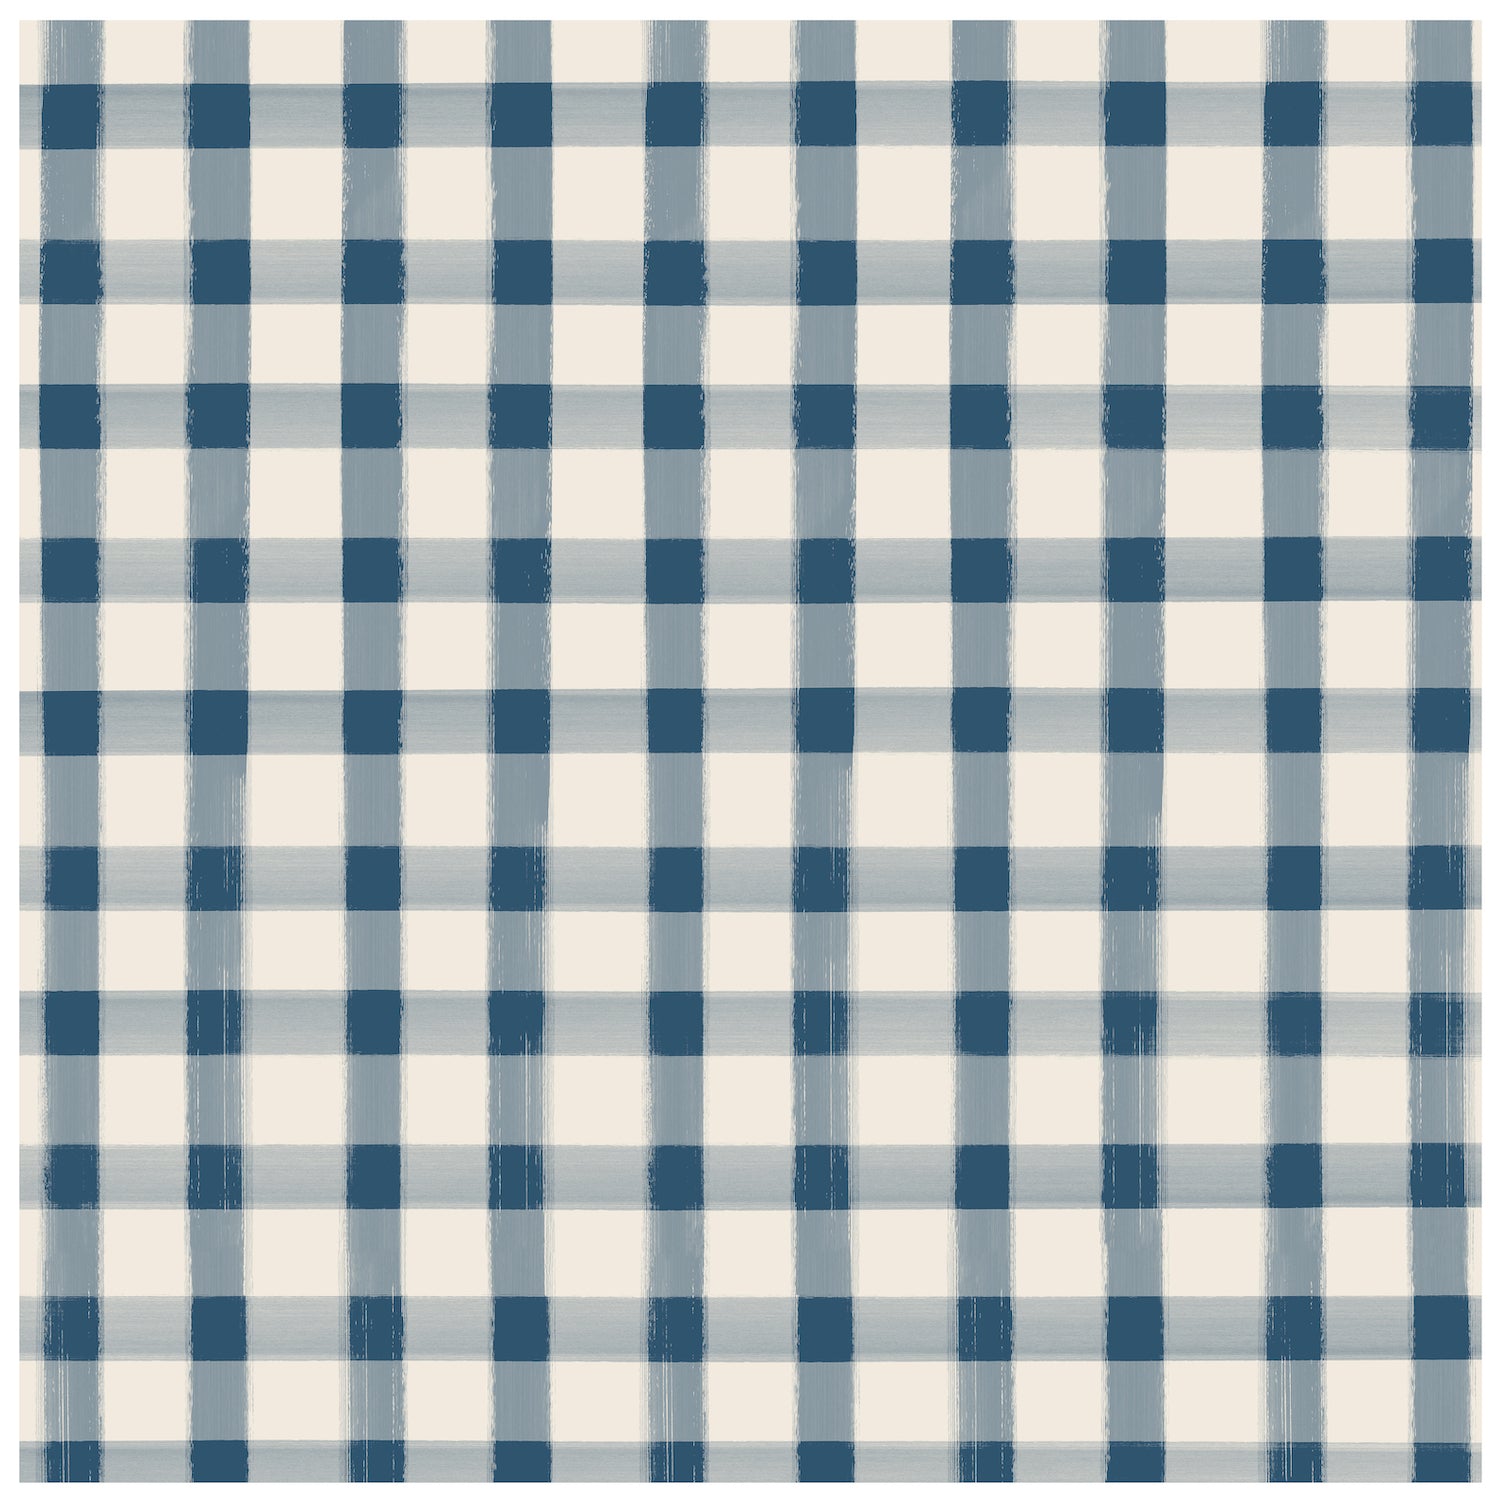 A square cocktail napkin featuring painted gingham grid check pattern made of light blue lines intersecting at blue squares, on a white background.